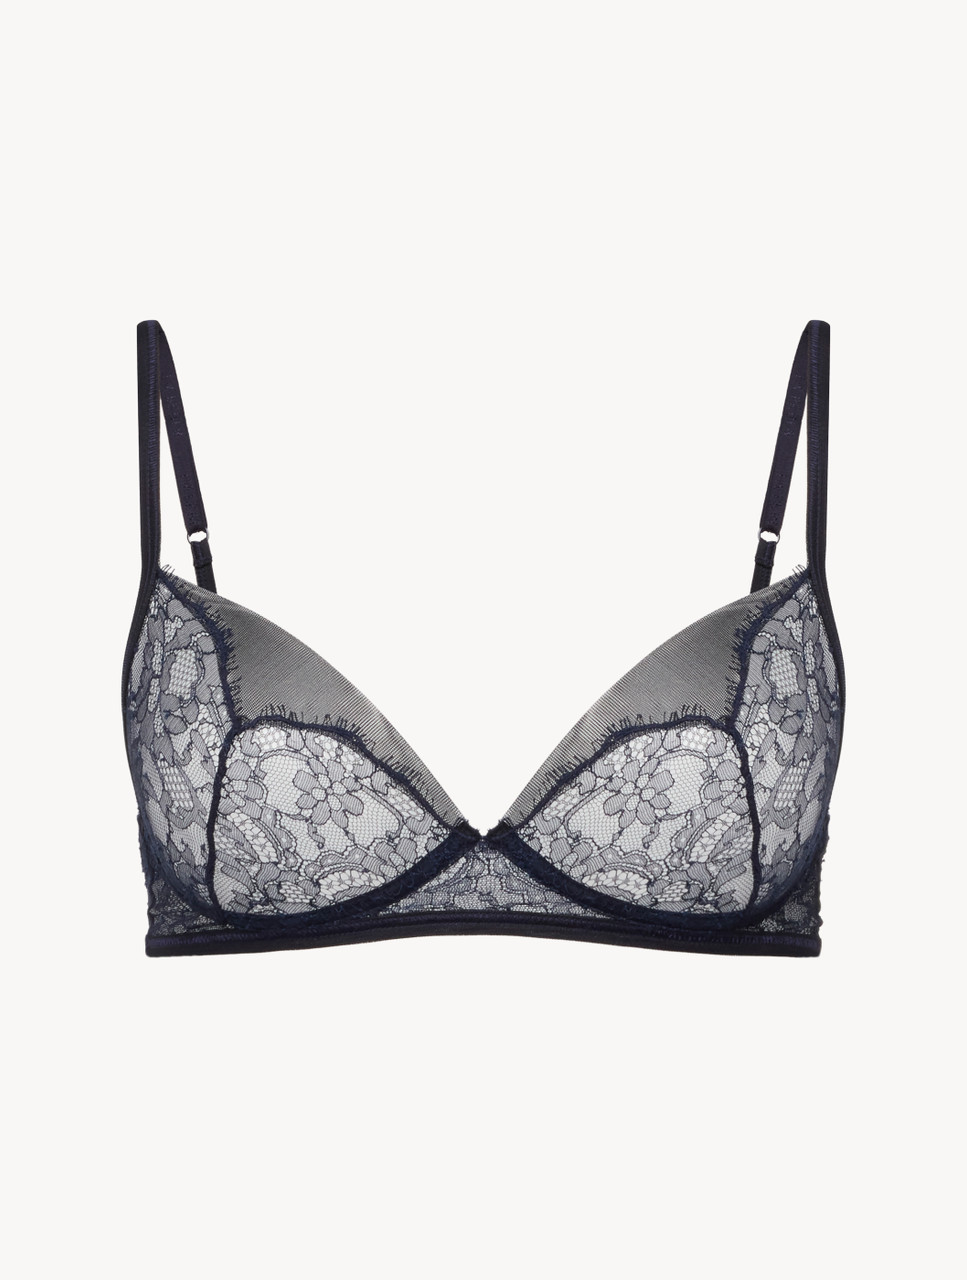 Soft Bralette in Steel Blue and Black with Leavers lace | La Perla